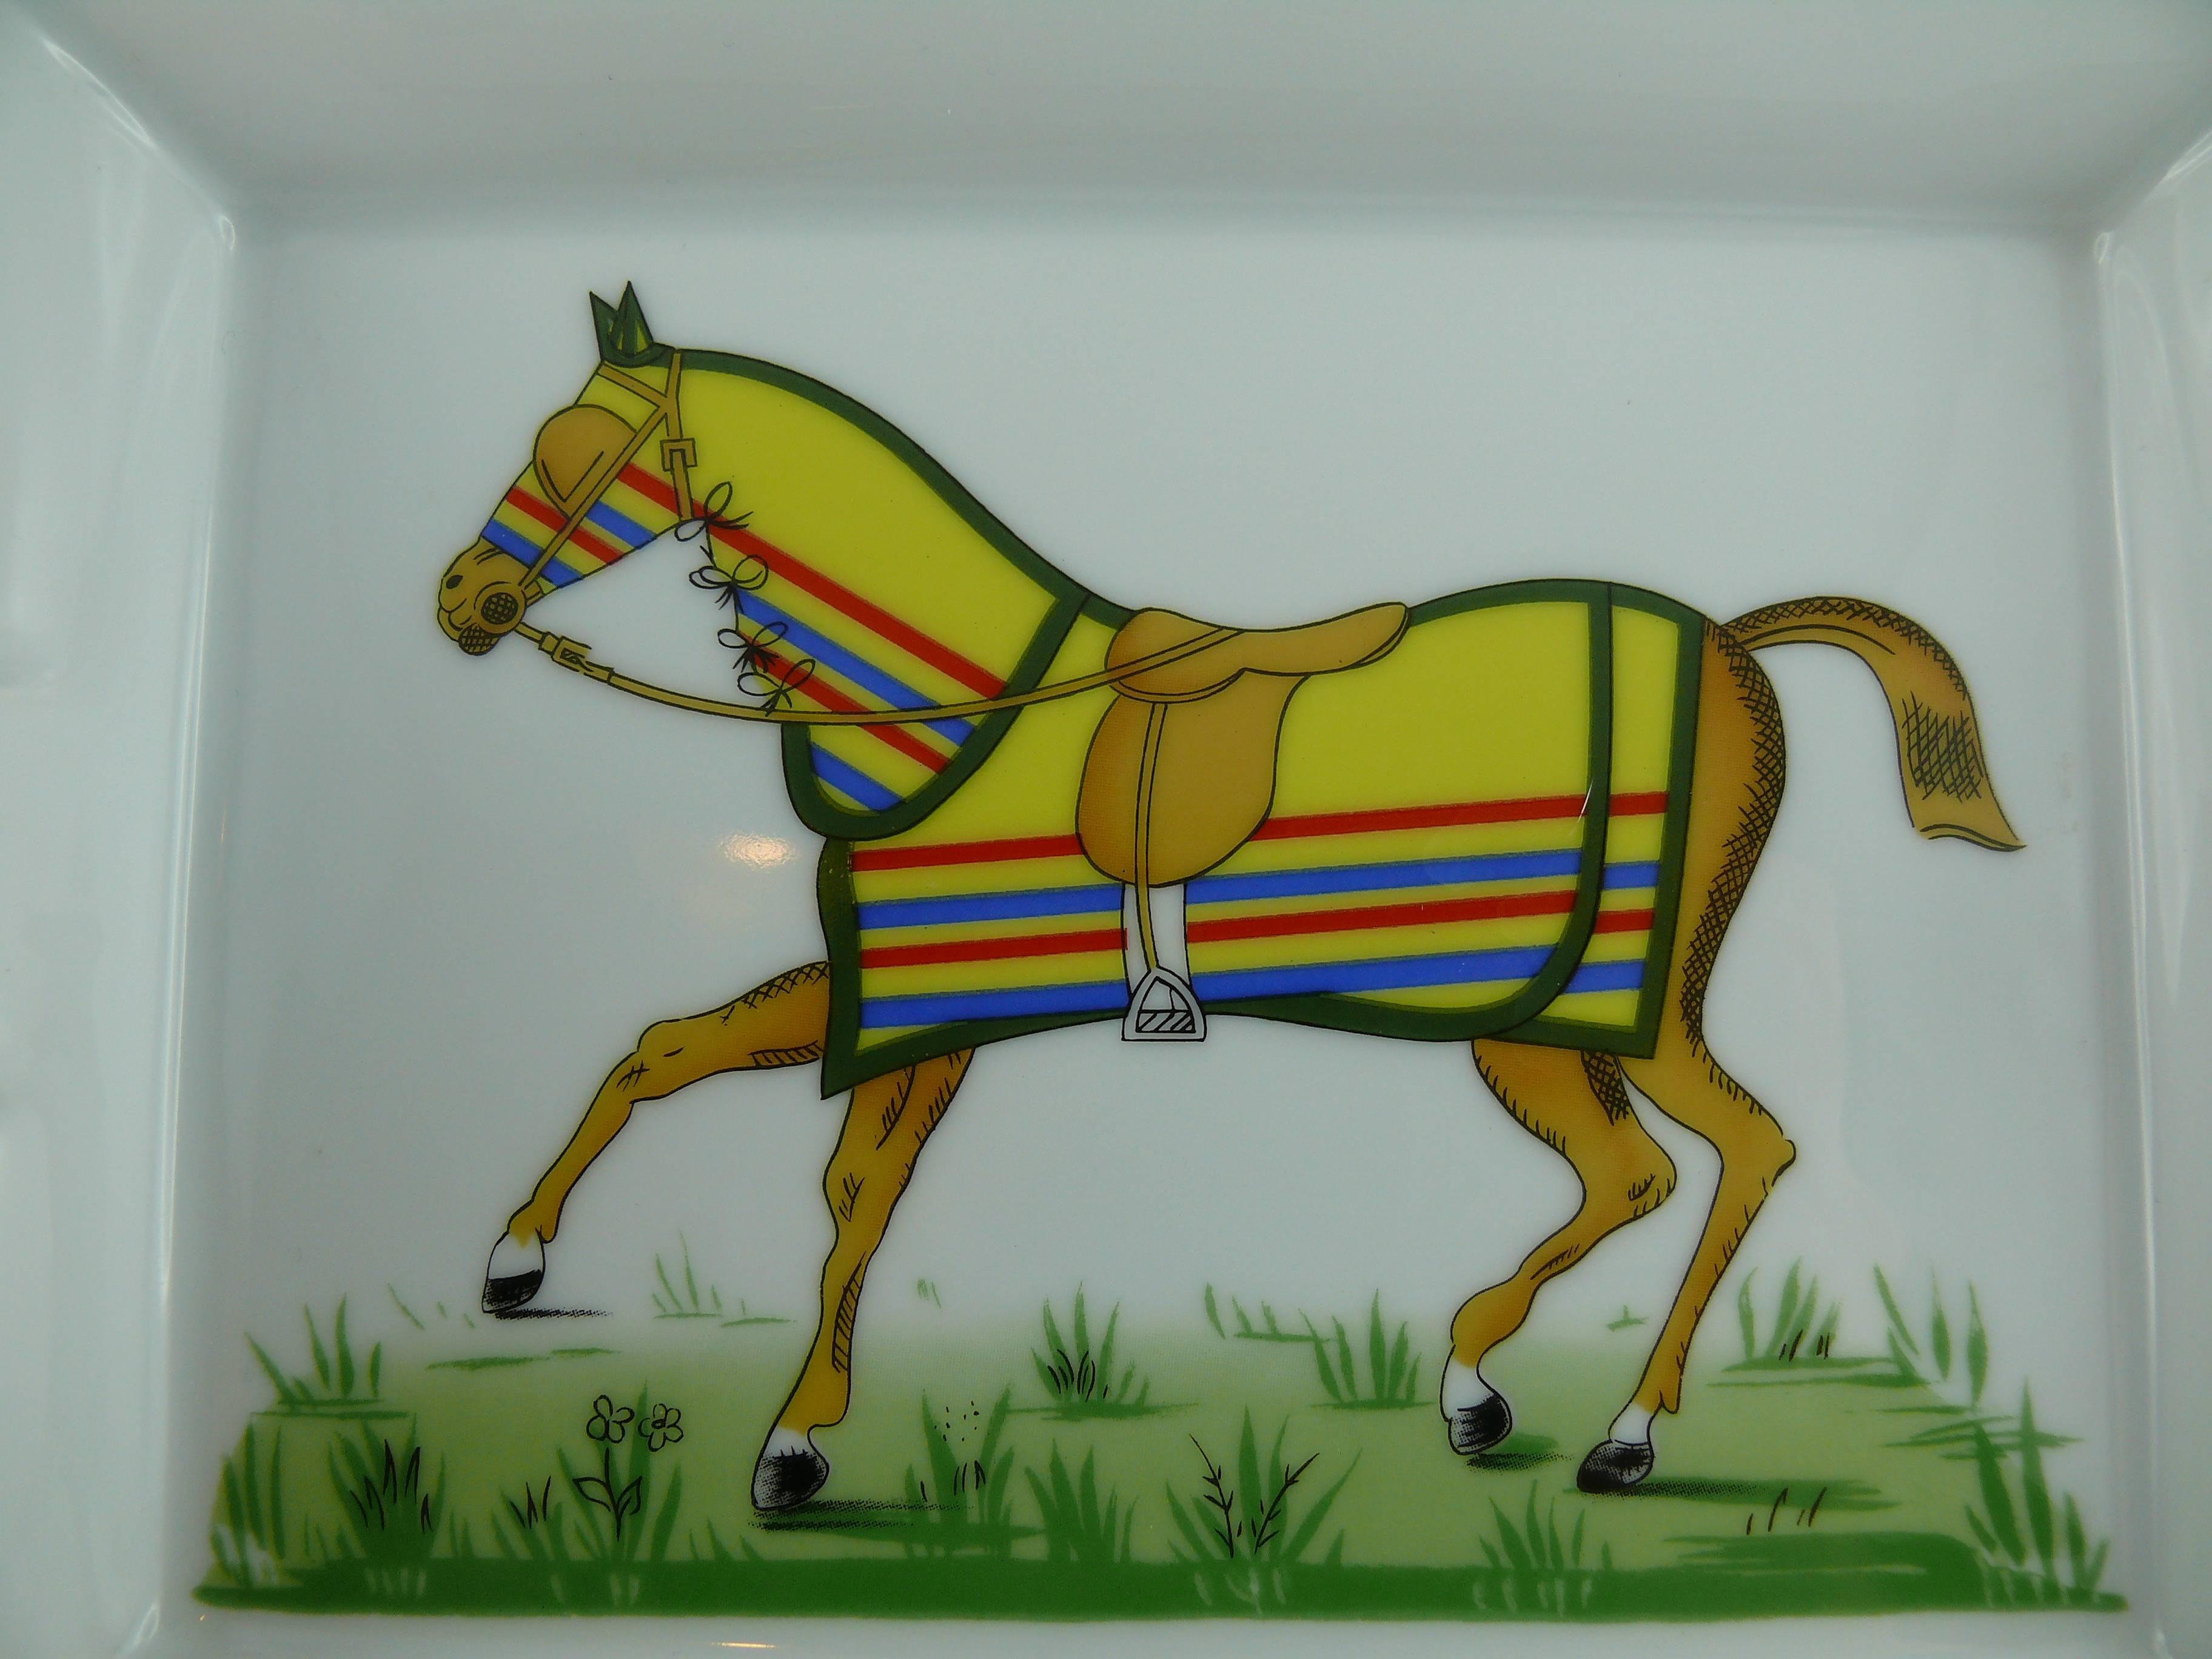 HERMES Paris large white porcelain cigar ashtray or pin tray printed with exquisite multi colored equestrian image. 

Red, yellow and gilt geometrical rims.

Marked HERMES Paris and Made in France.

Note
As a buyer, you are fully responsible